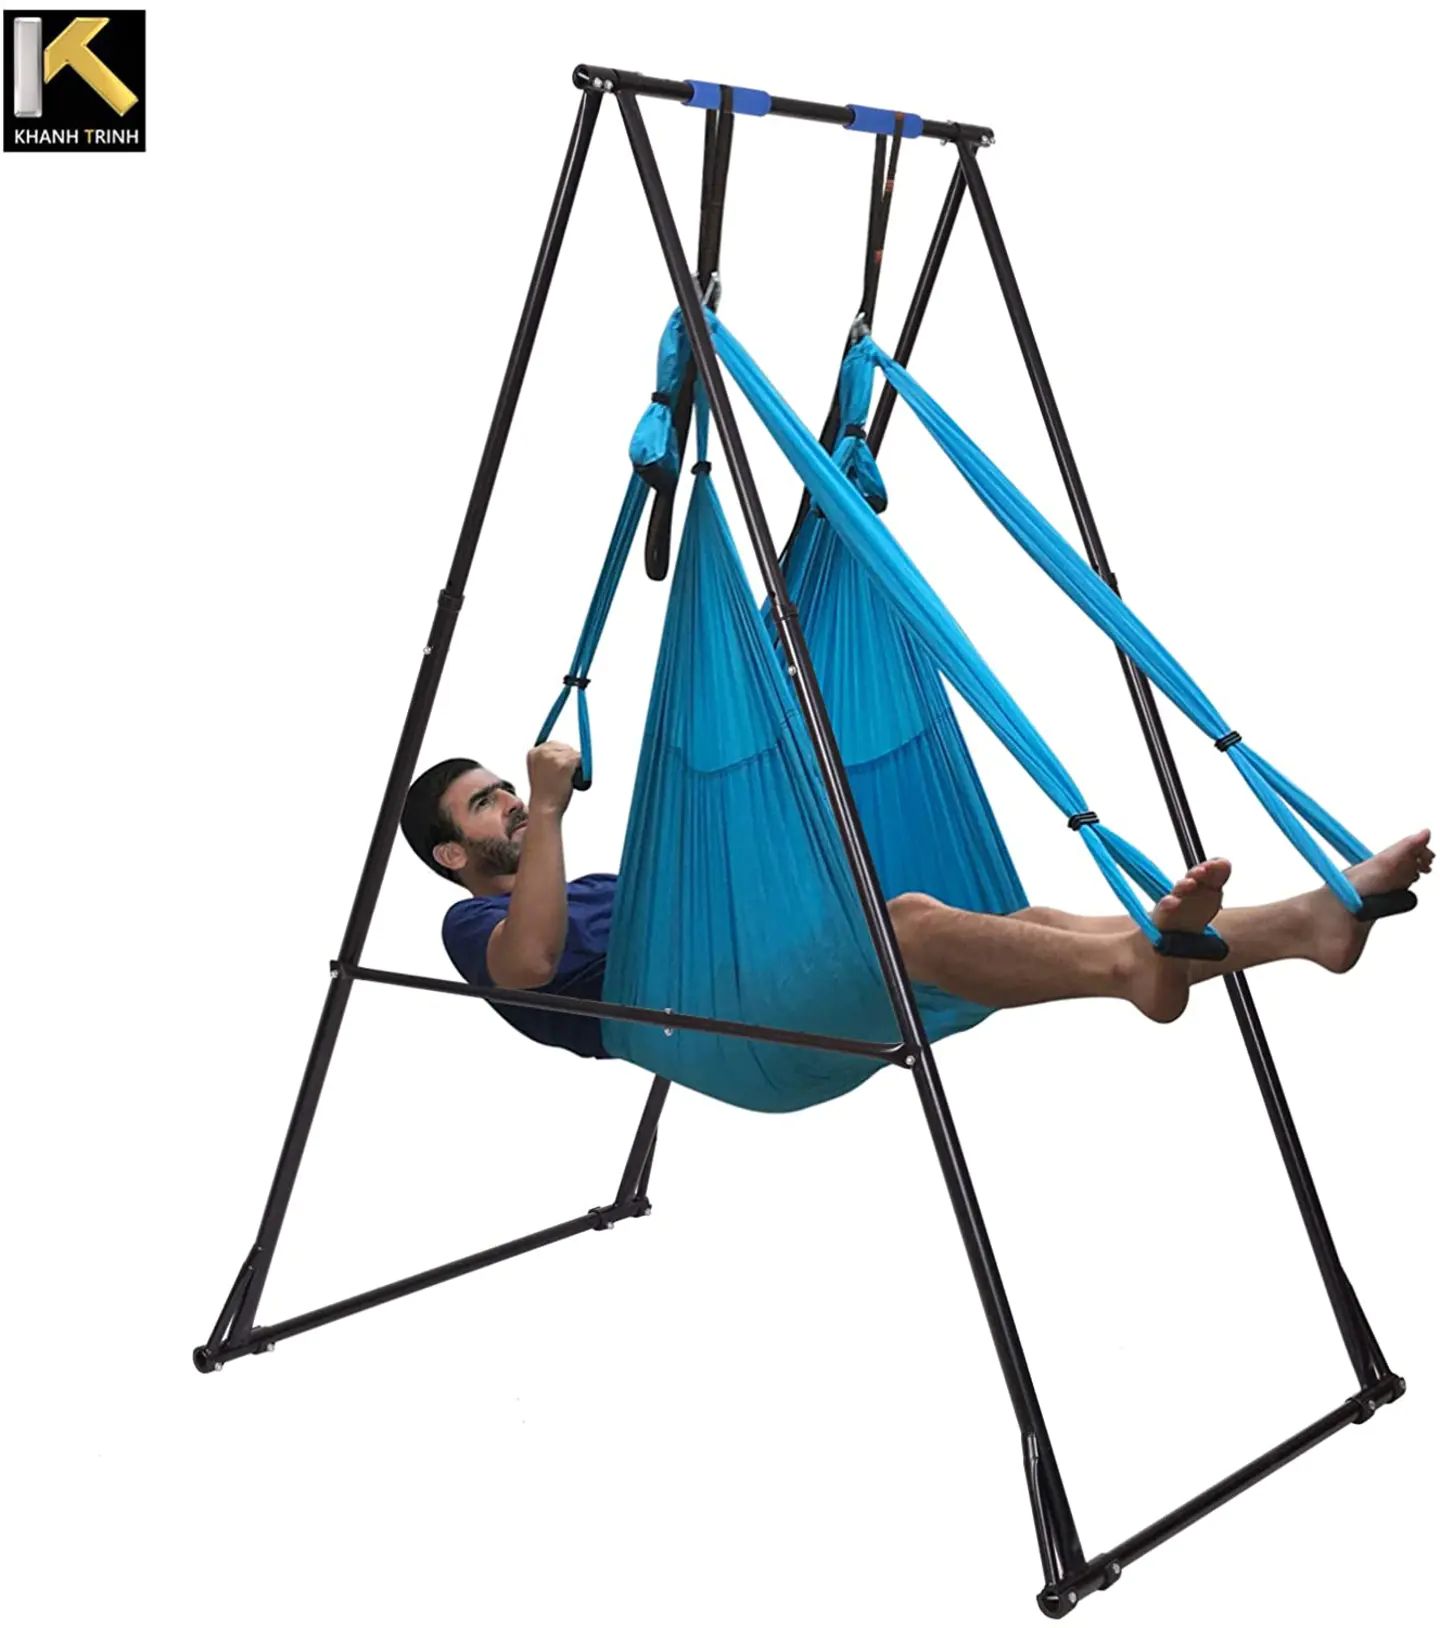 Air Yoga Equipment Set Includes: Blue Aerial Yoga Hammock and The Height-Adjustable Foldable Sturdy Durable KT Yoga Swing Stand Frame